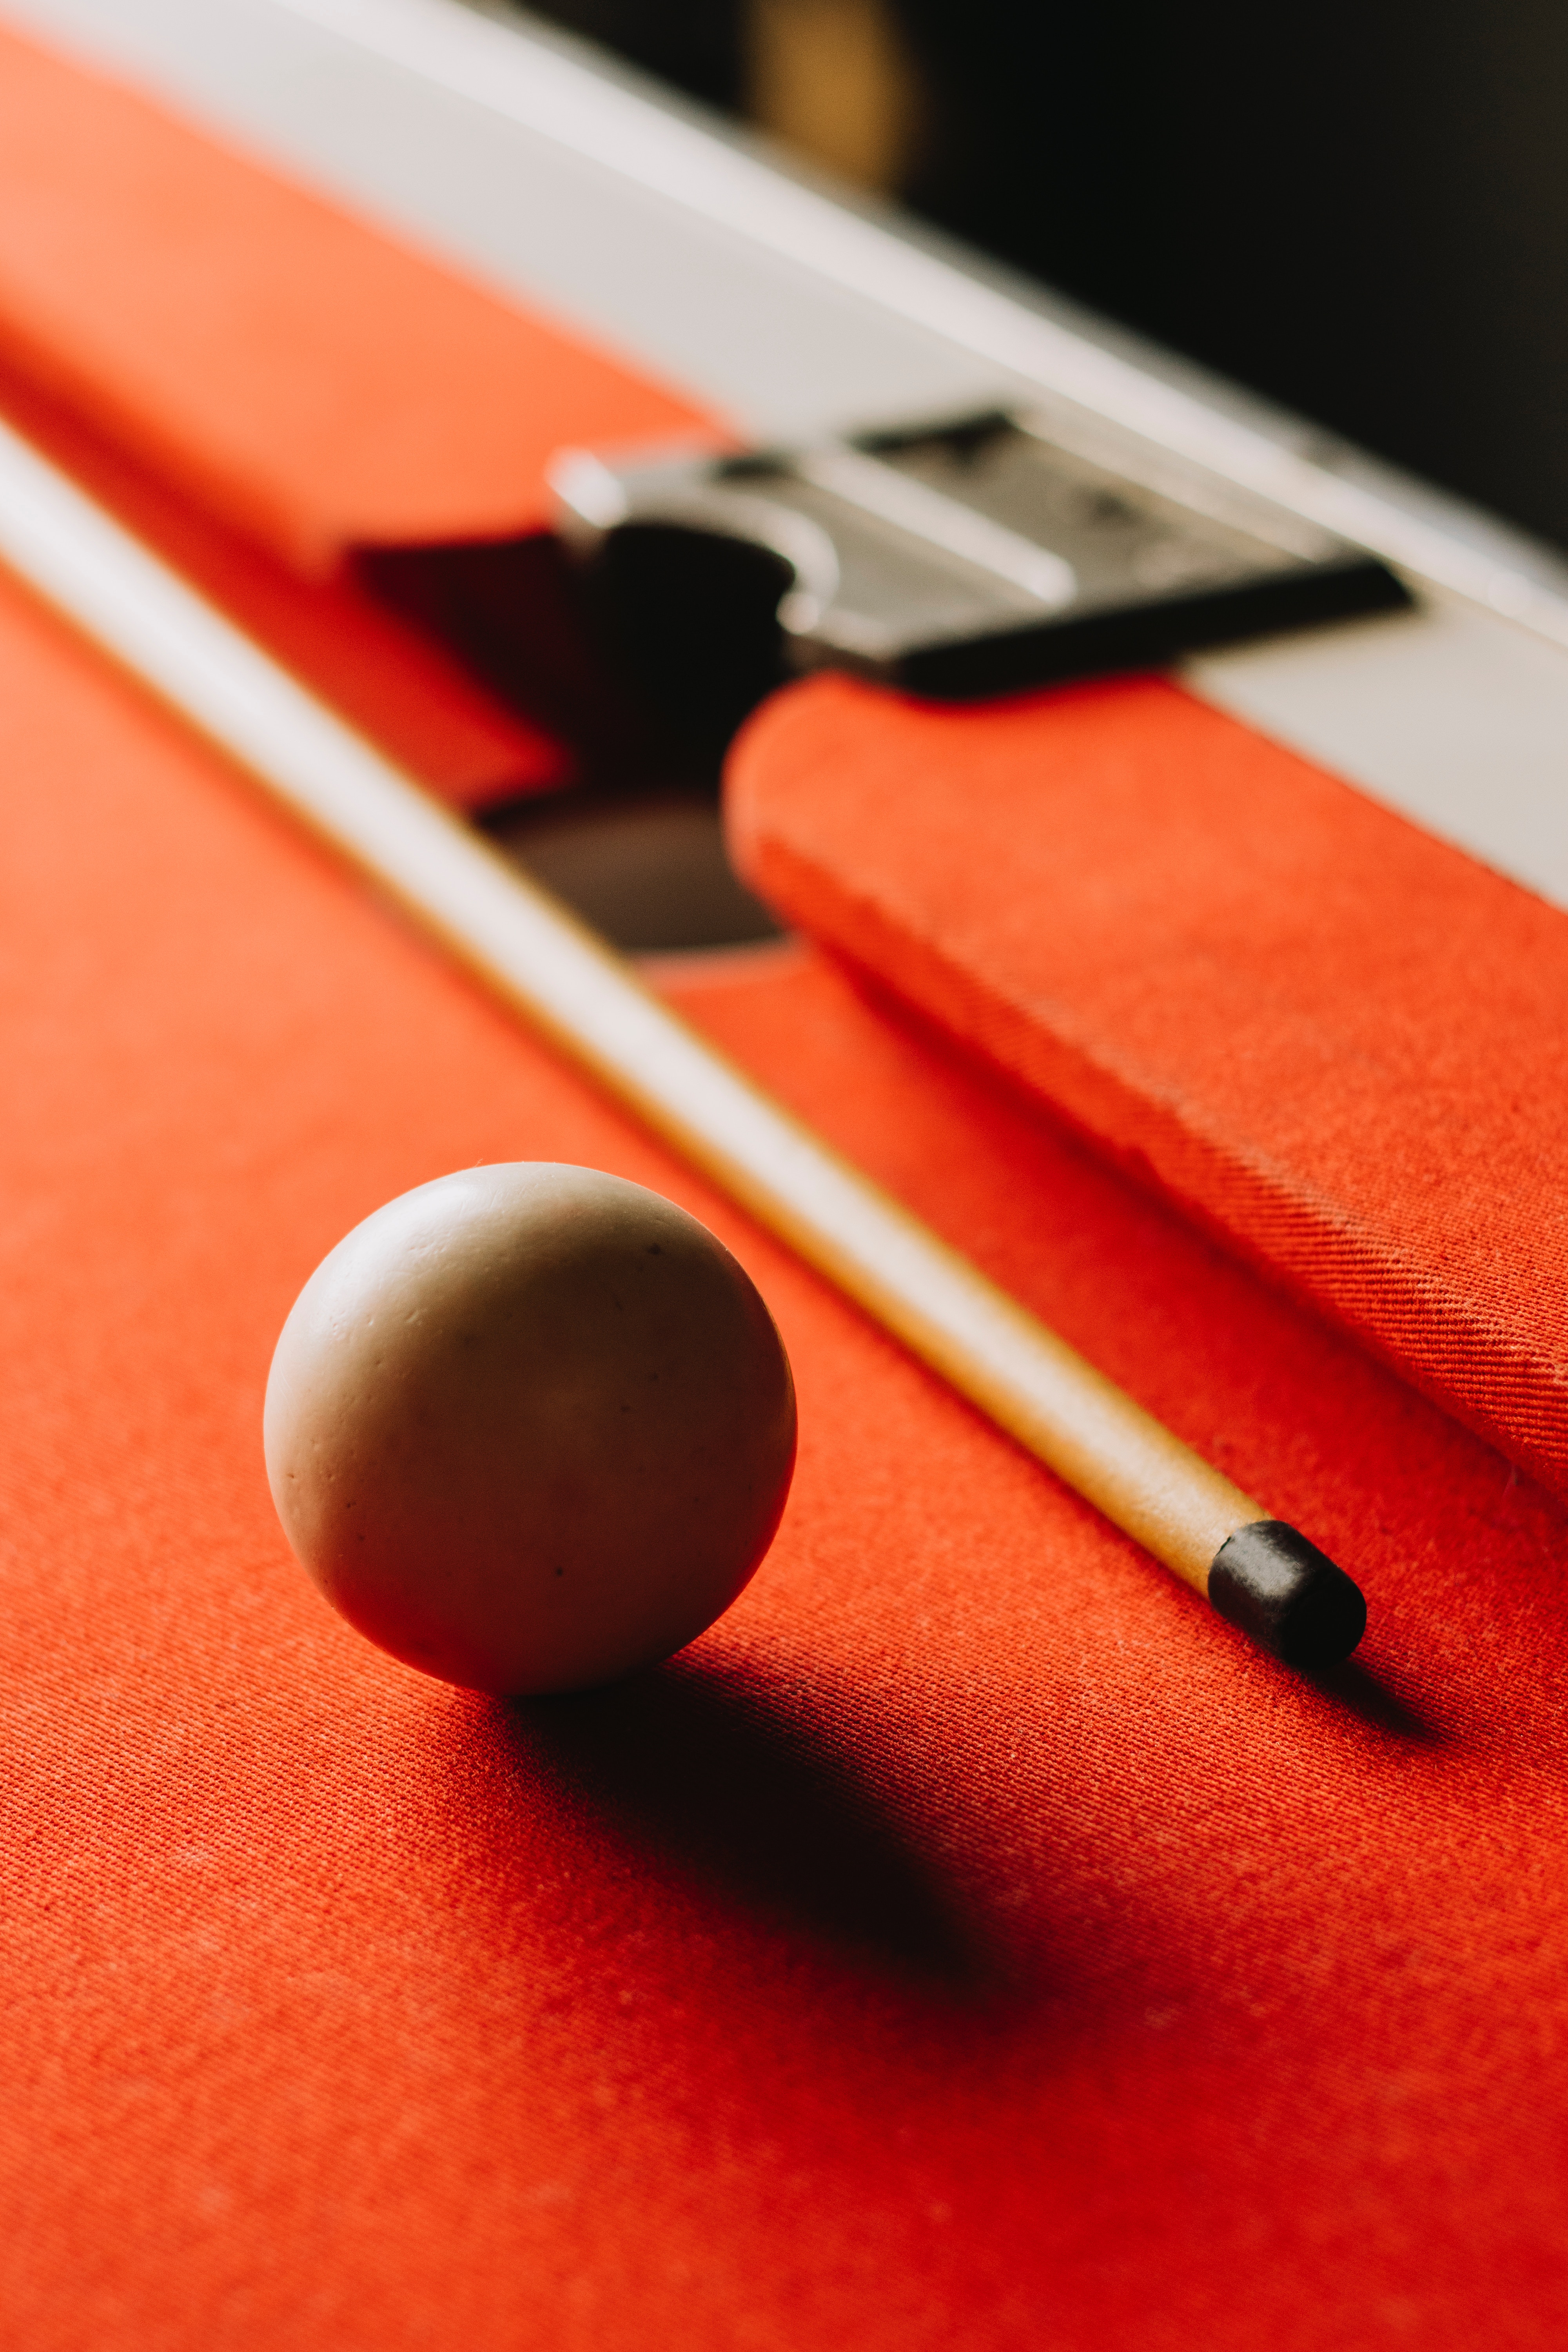 billiards, sports, red, shadow, ball, table, hole, cue